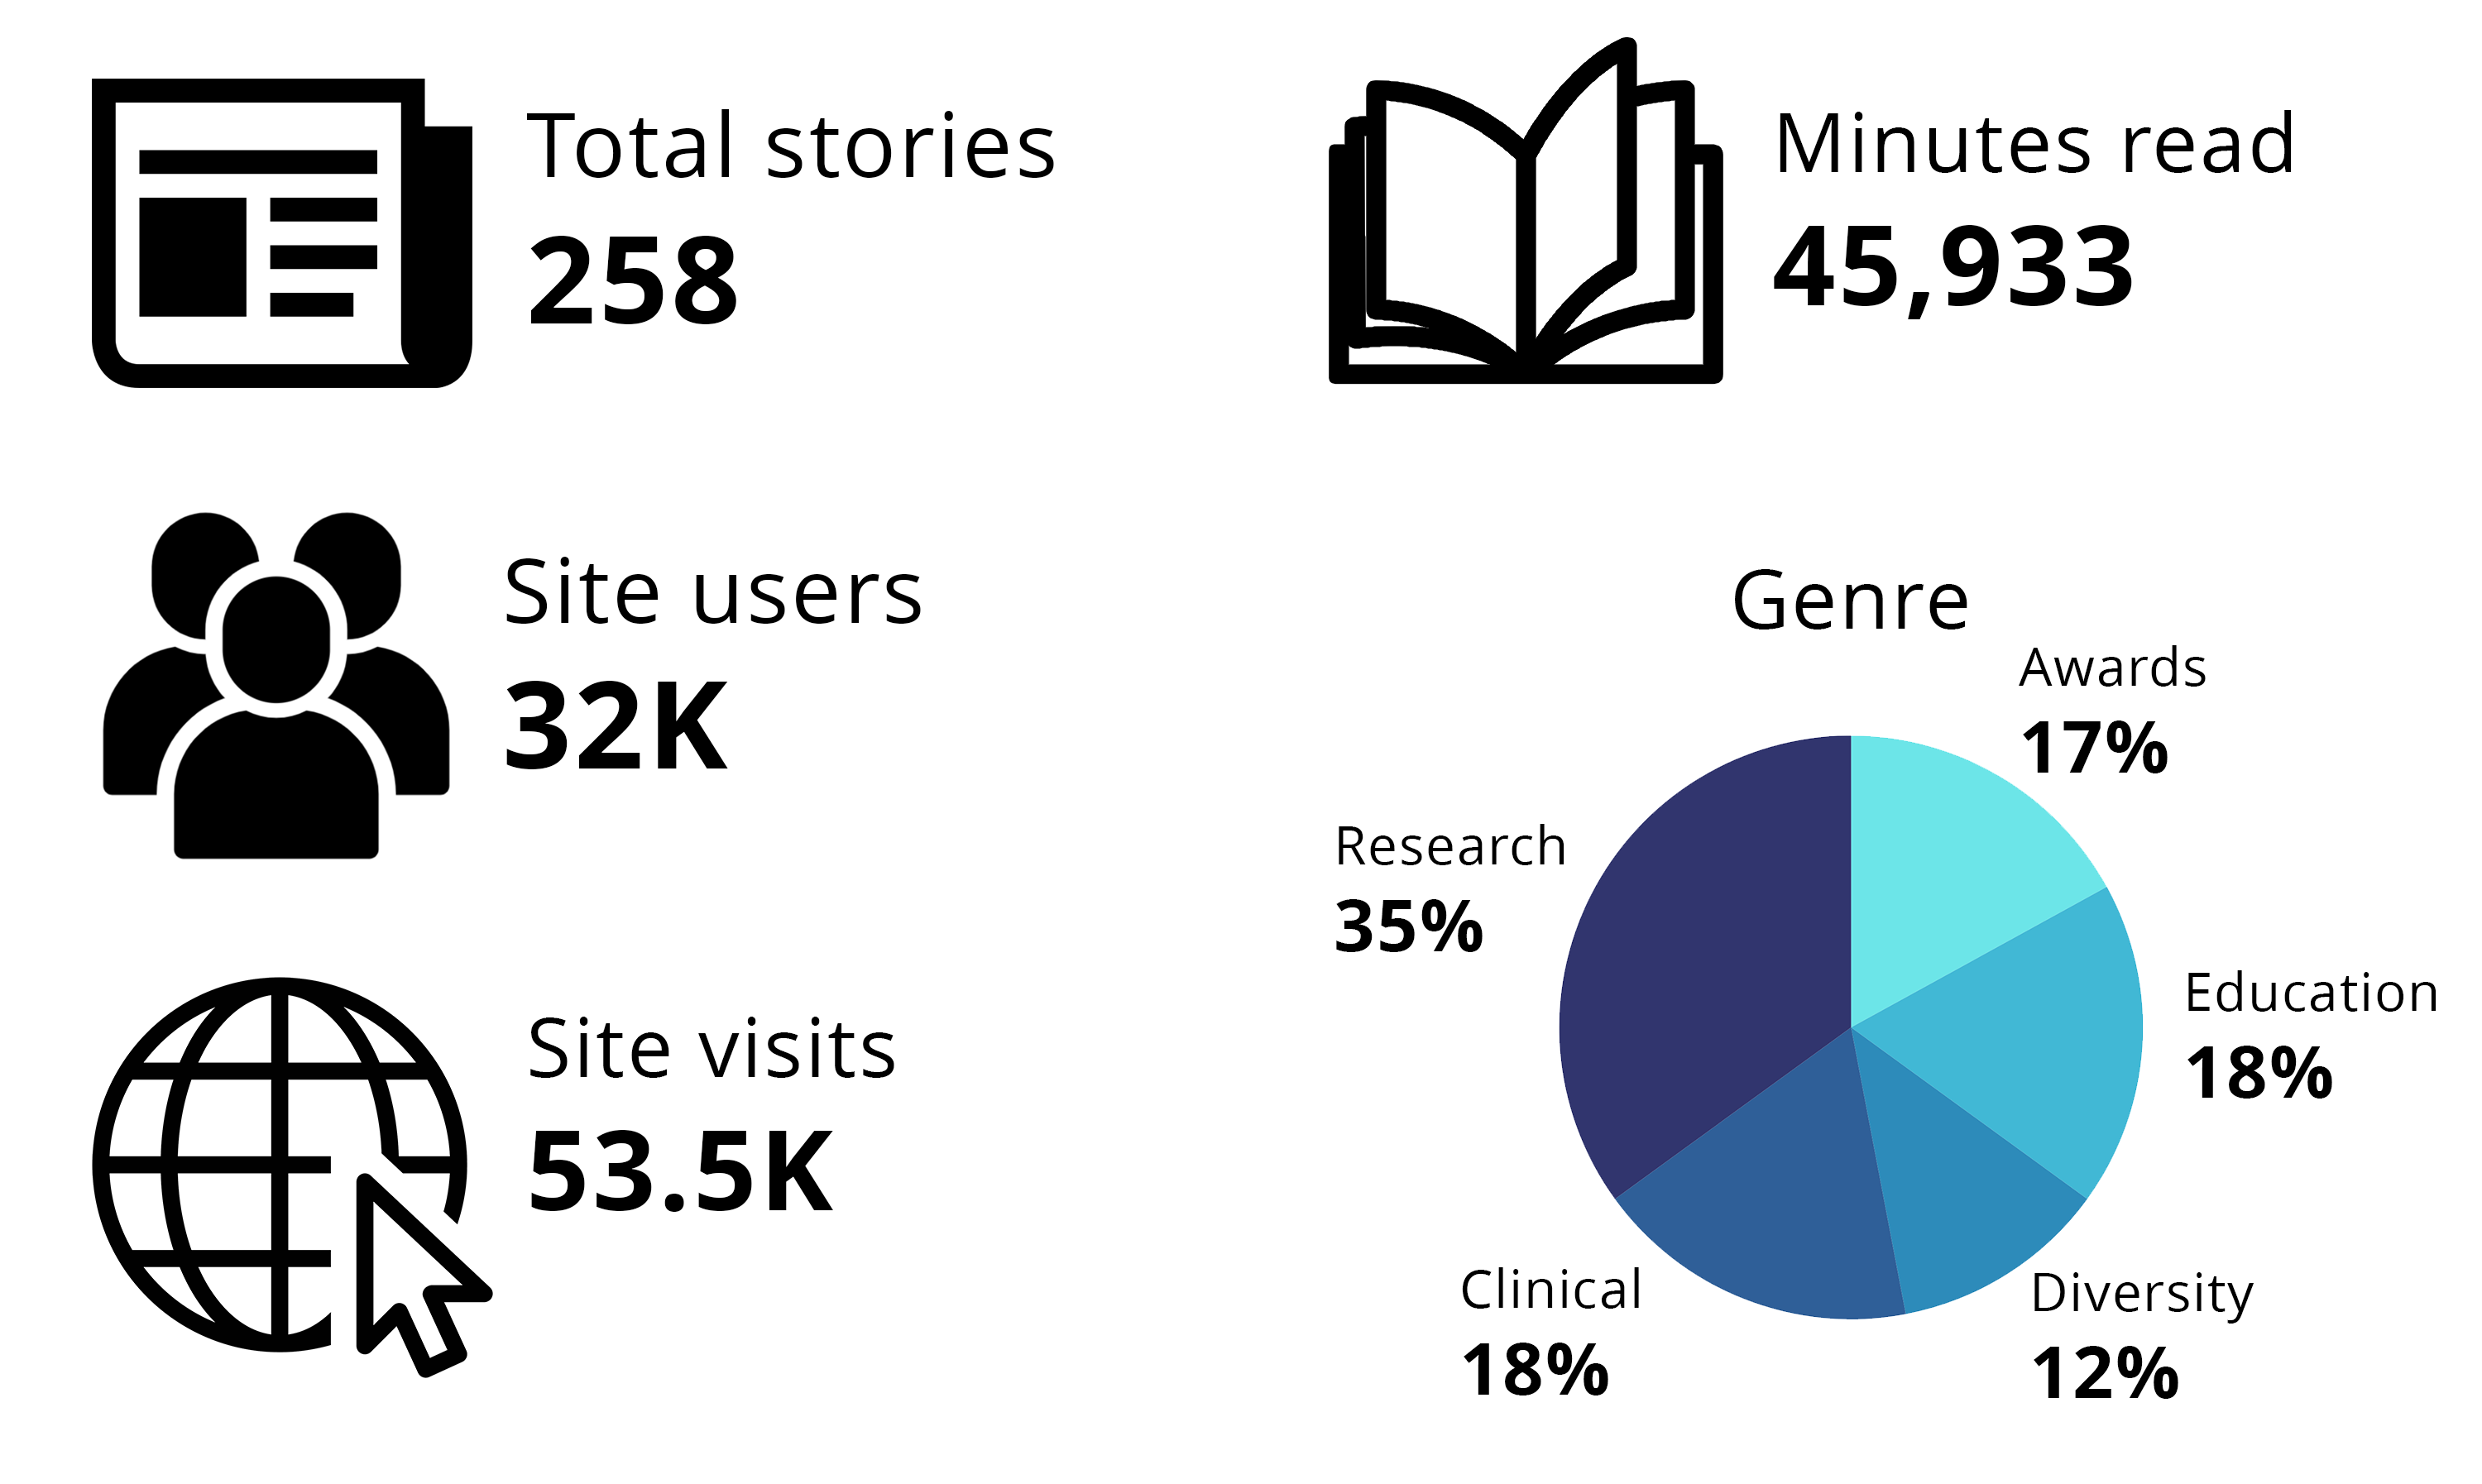 News in review 53.5K mednews pageviews – 197% increase from last year 32K users – 310% increase from last year Awards – 49 – 17% Clinical – 51 – 18% Diversity – 34 – 12% Education – 52 – 18% Research – 102 – 35% 288 Staff – 20 In the news – 20